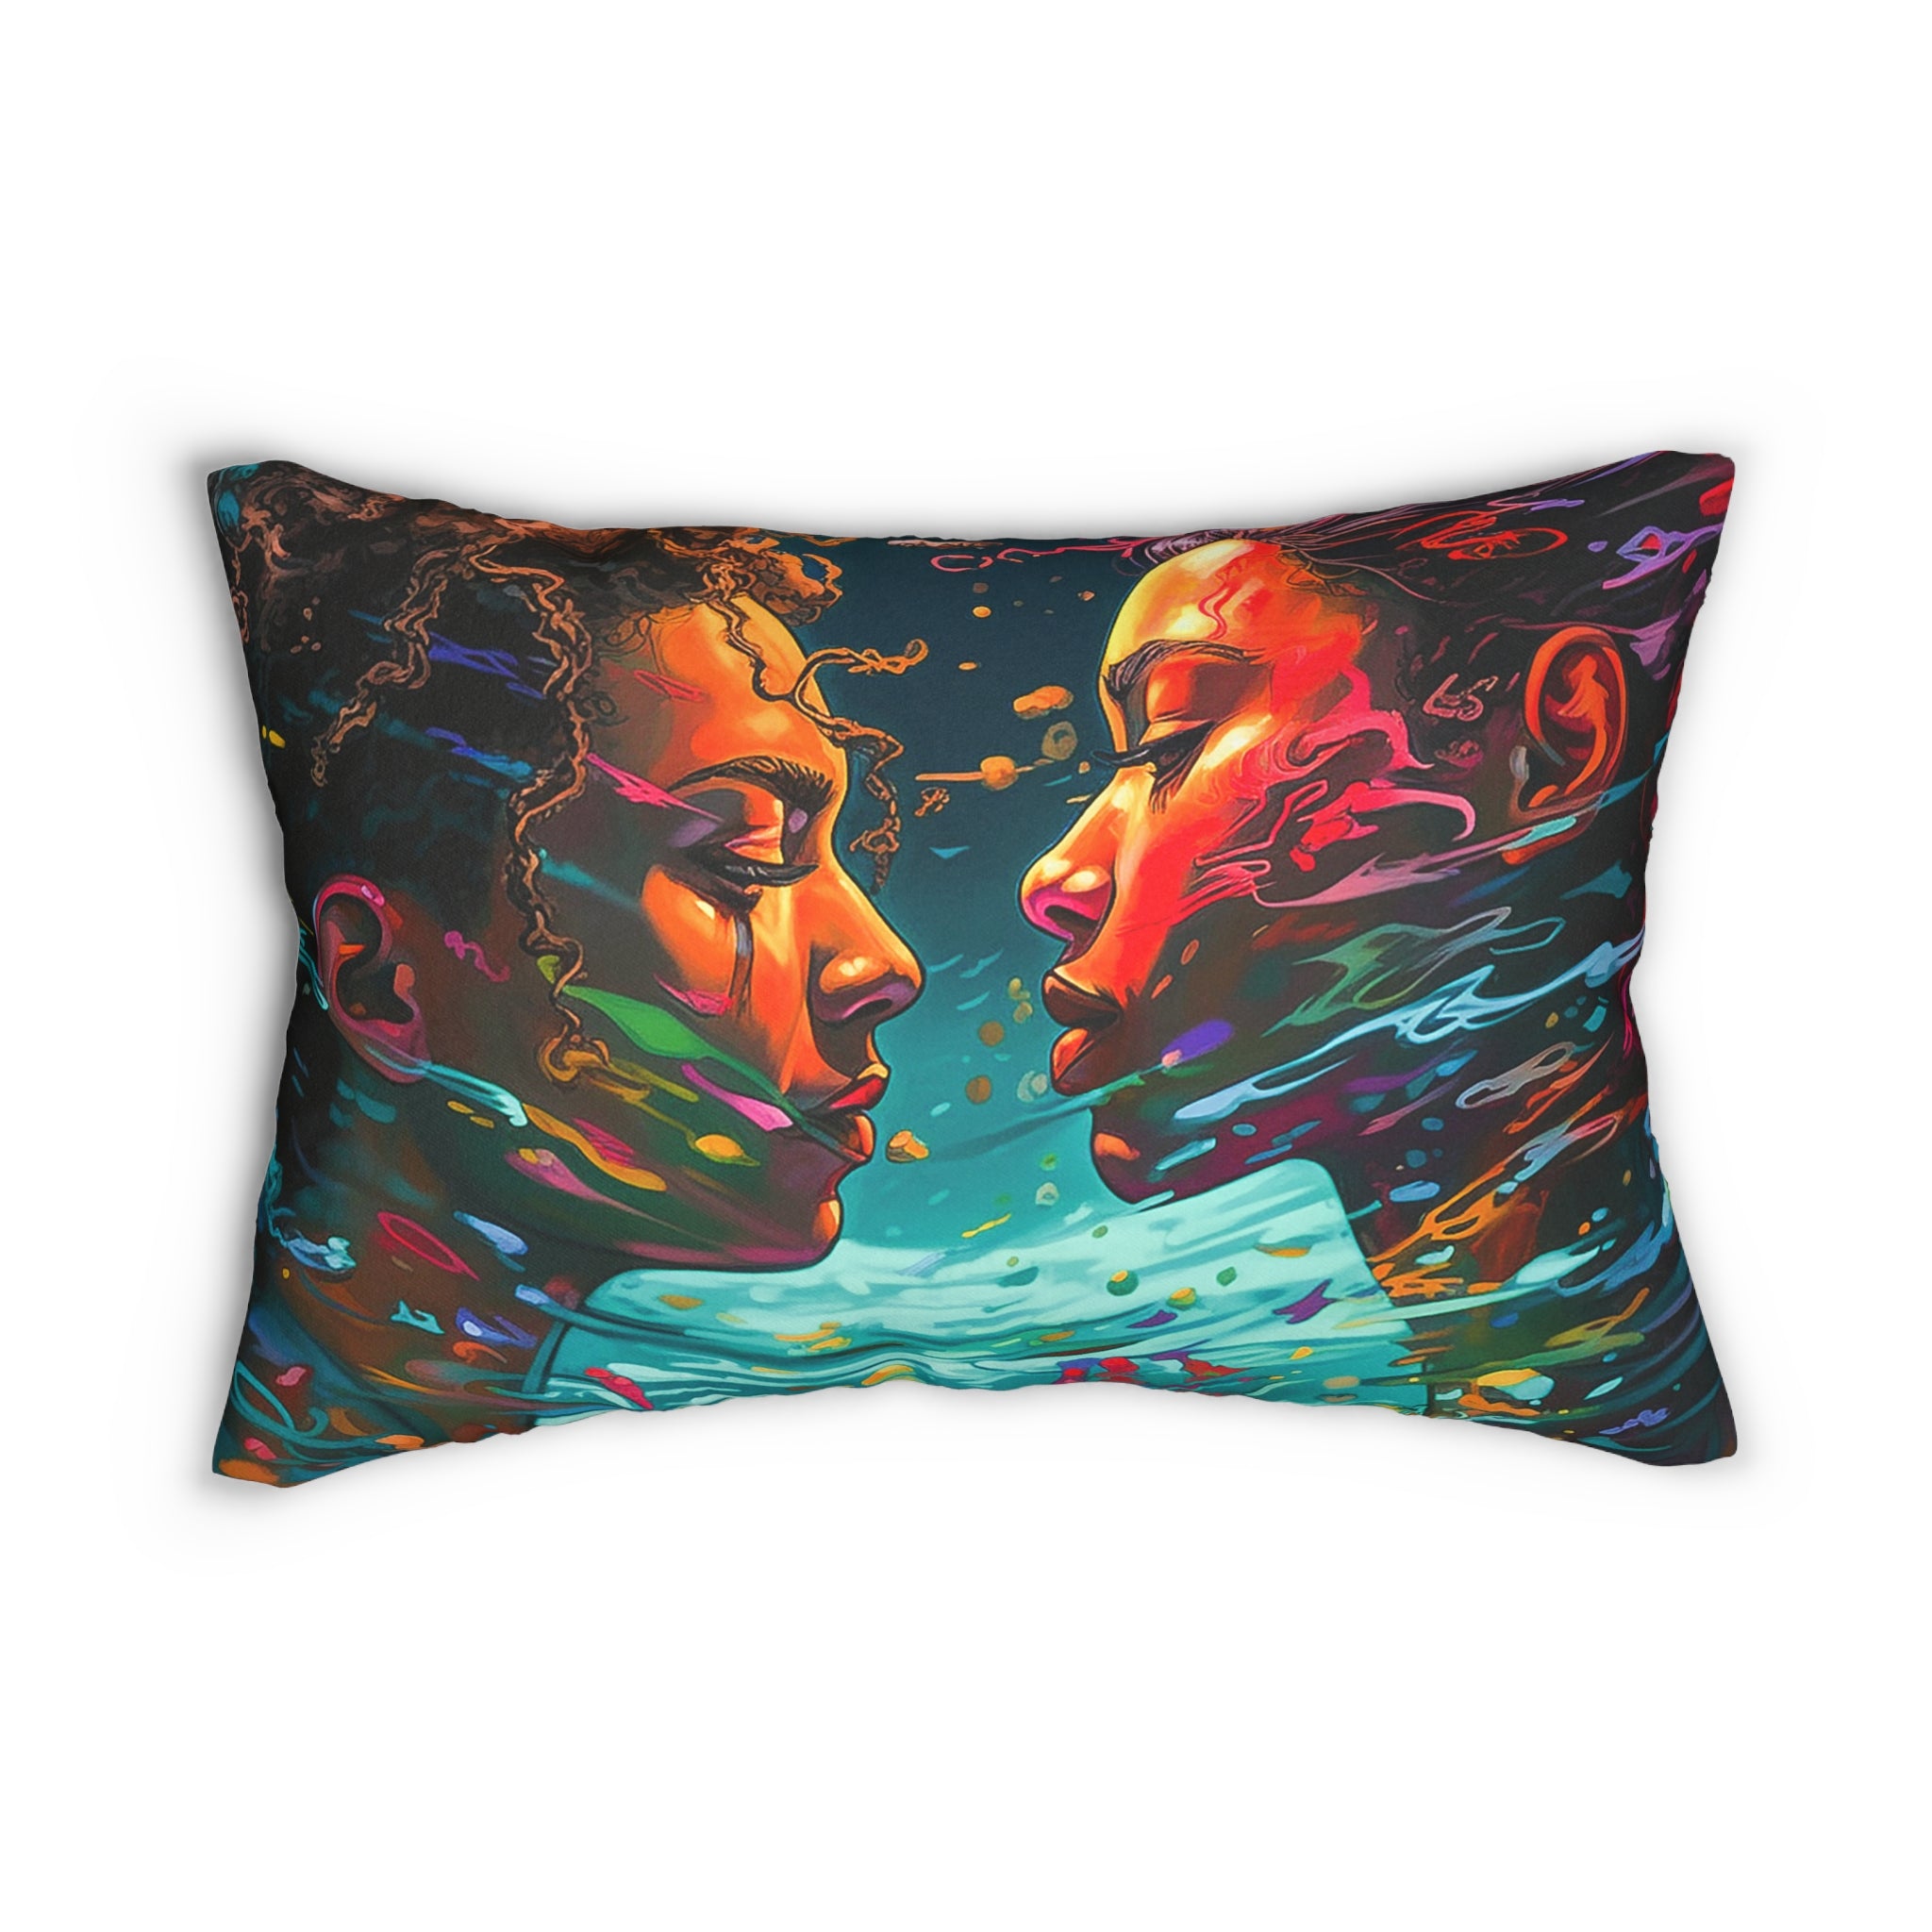 "COLOR OF LOVE" - African American Themed Lumbar Pillow